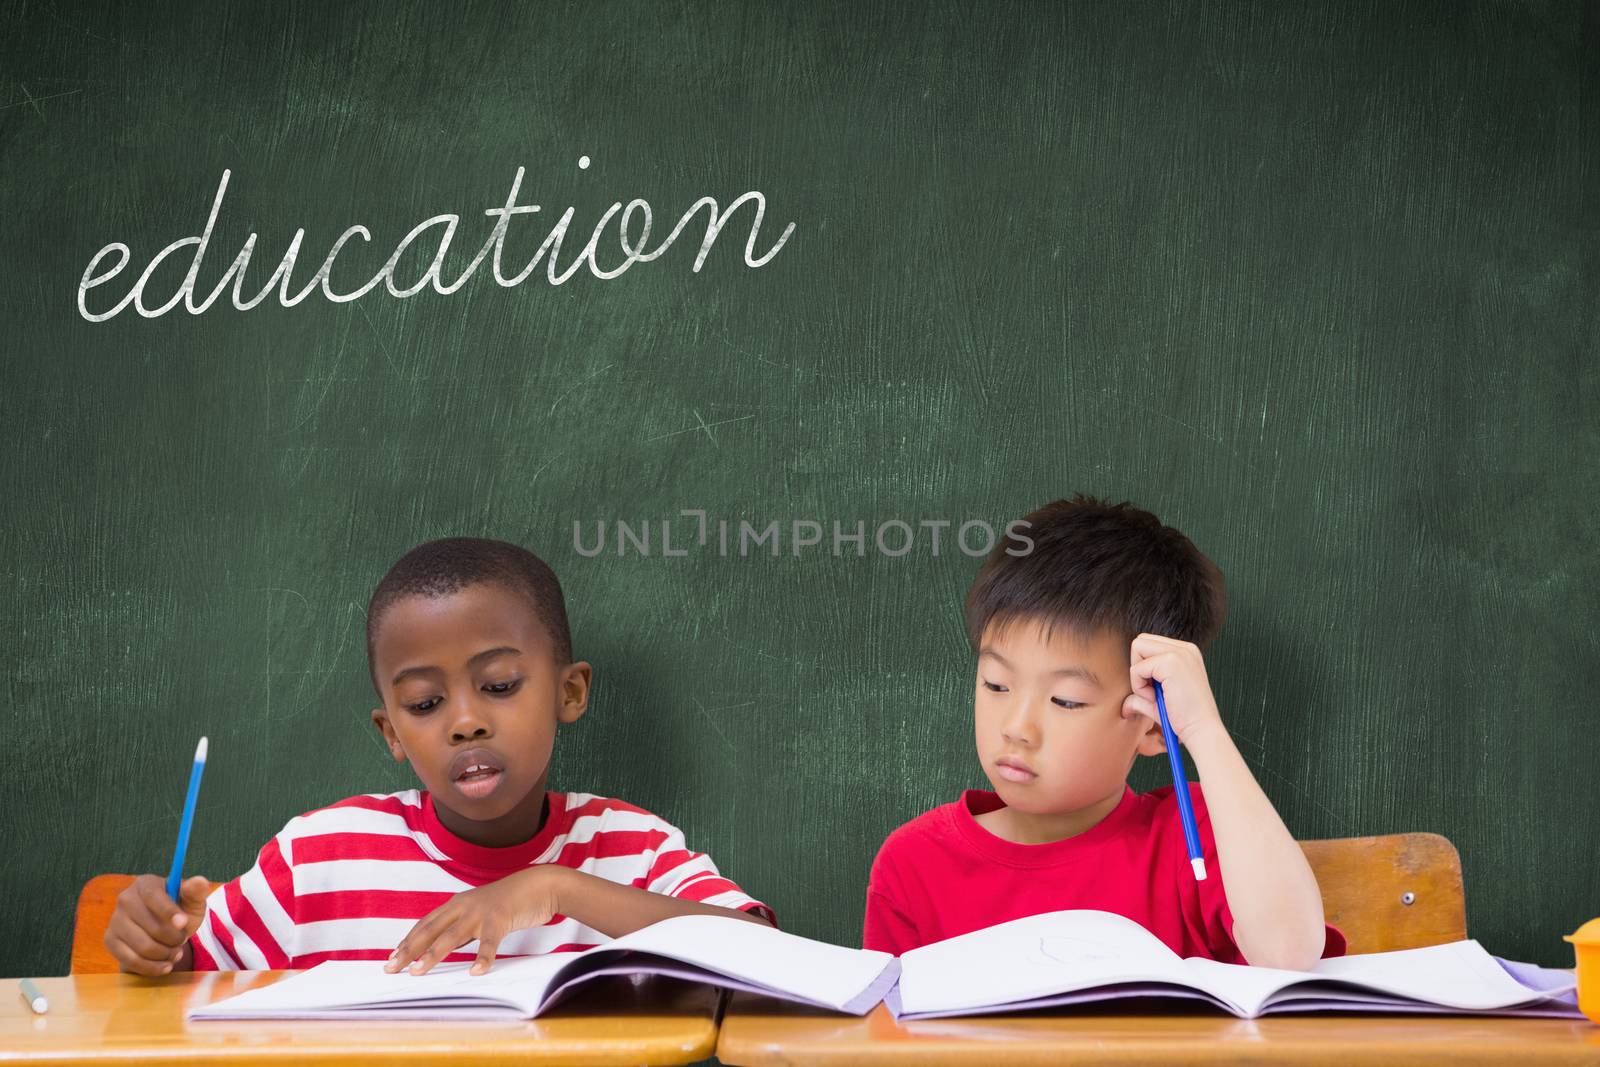 The word education and cute pupils writing at desk in classroom against green chalkboard